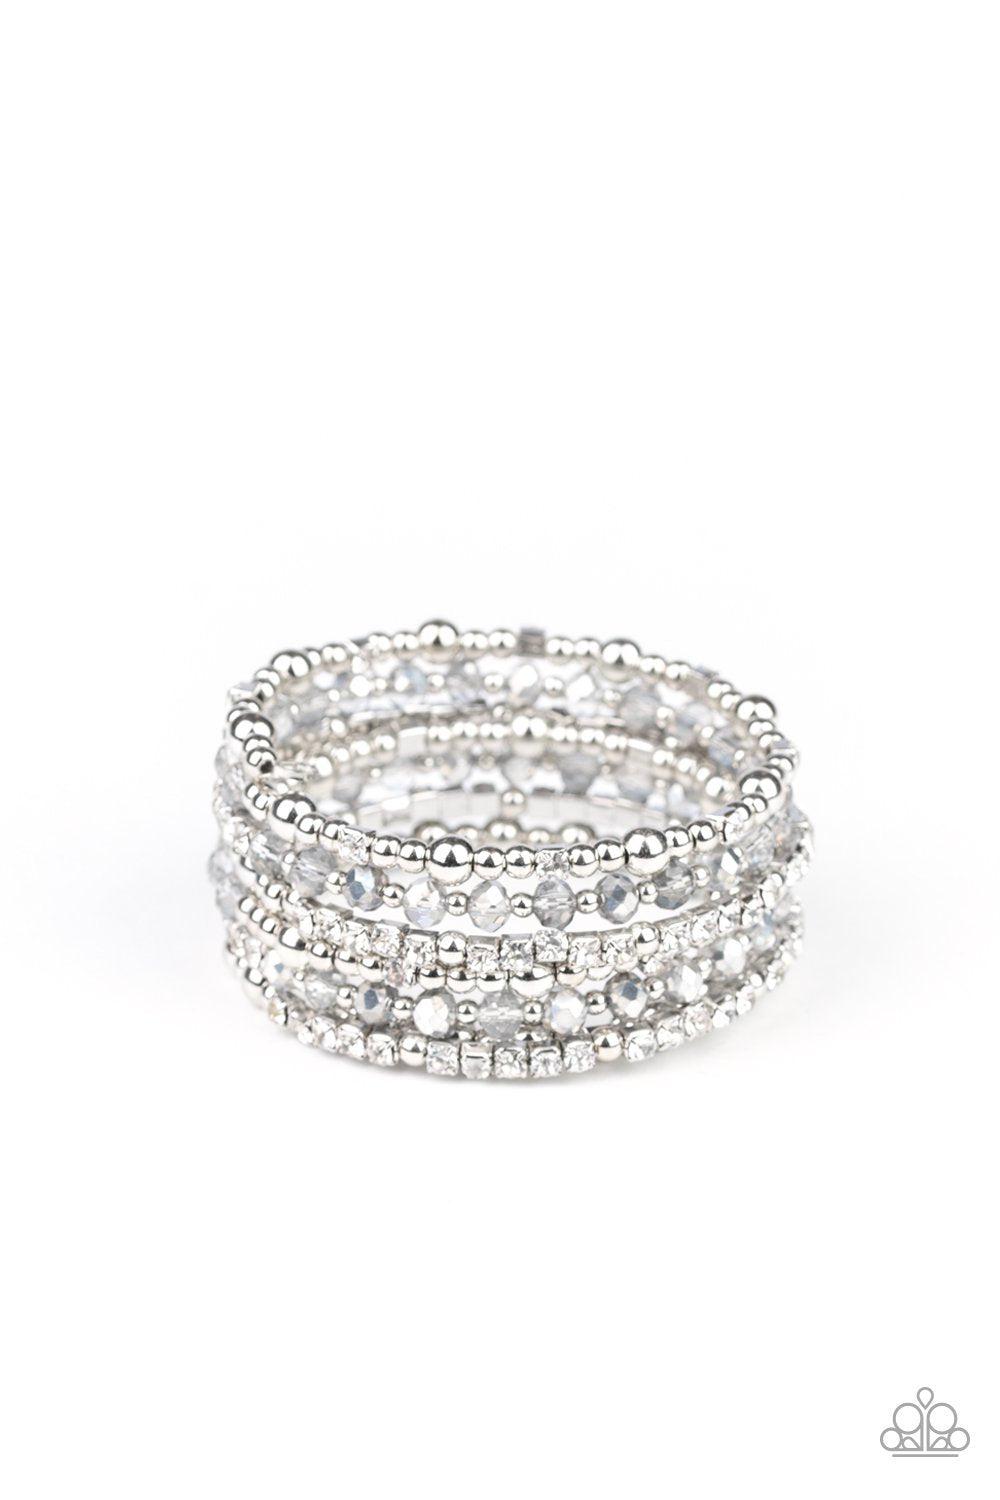 ICE Knowing You Silver Wire Wrap Bracelet - Paparazzi Accessories-CarasShop.com - $5 Jewelry by Cara Jewels